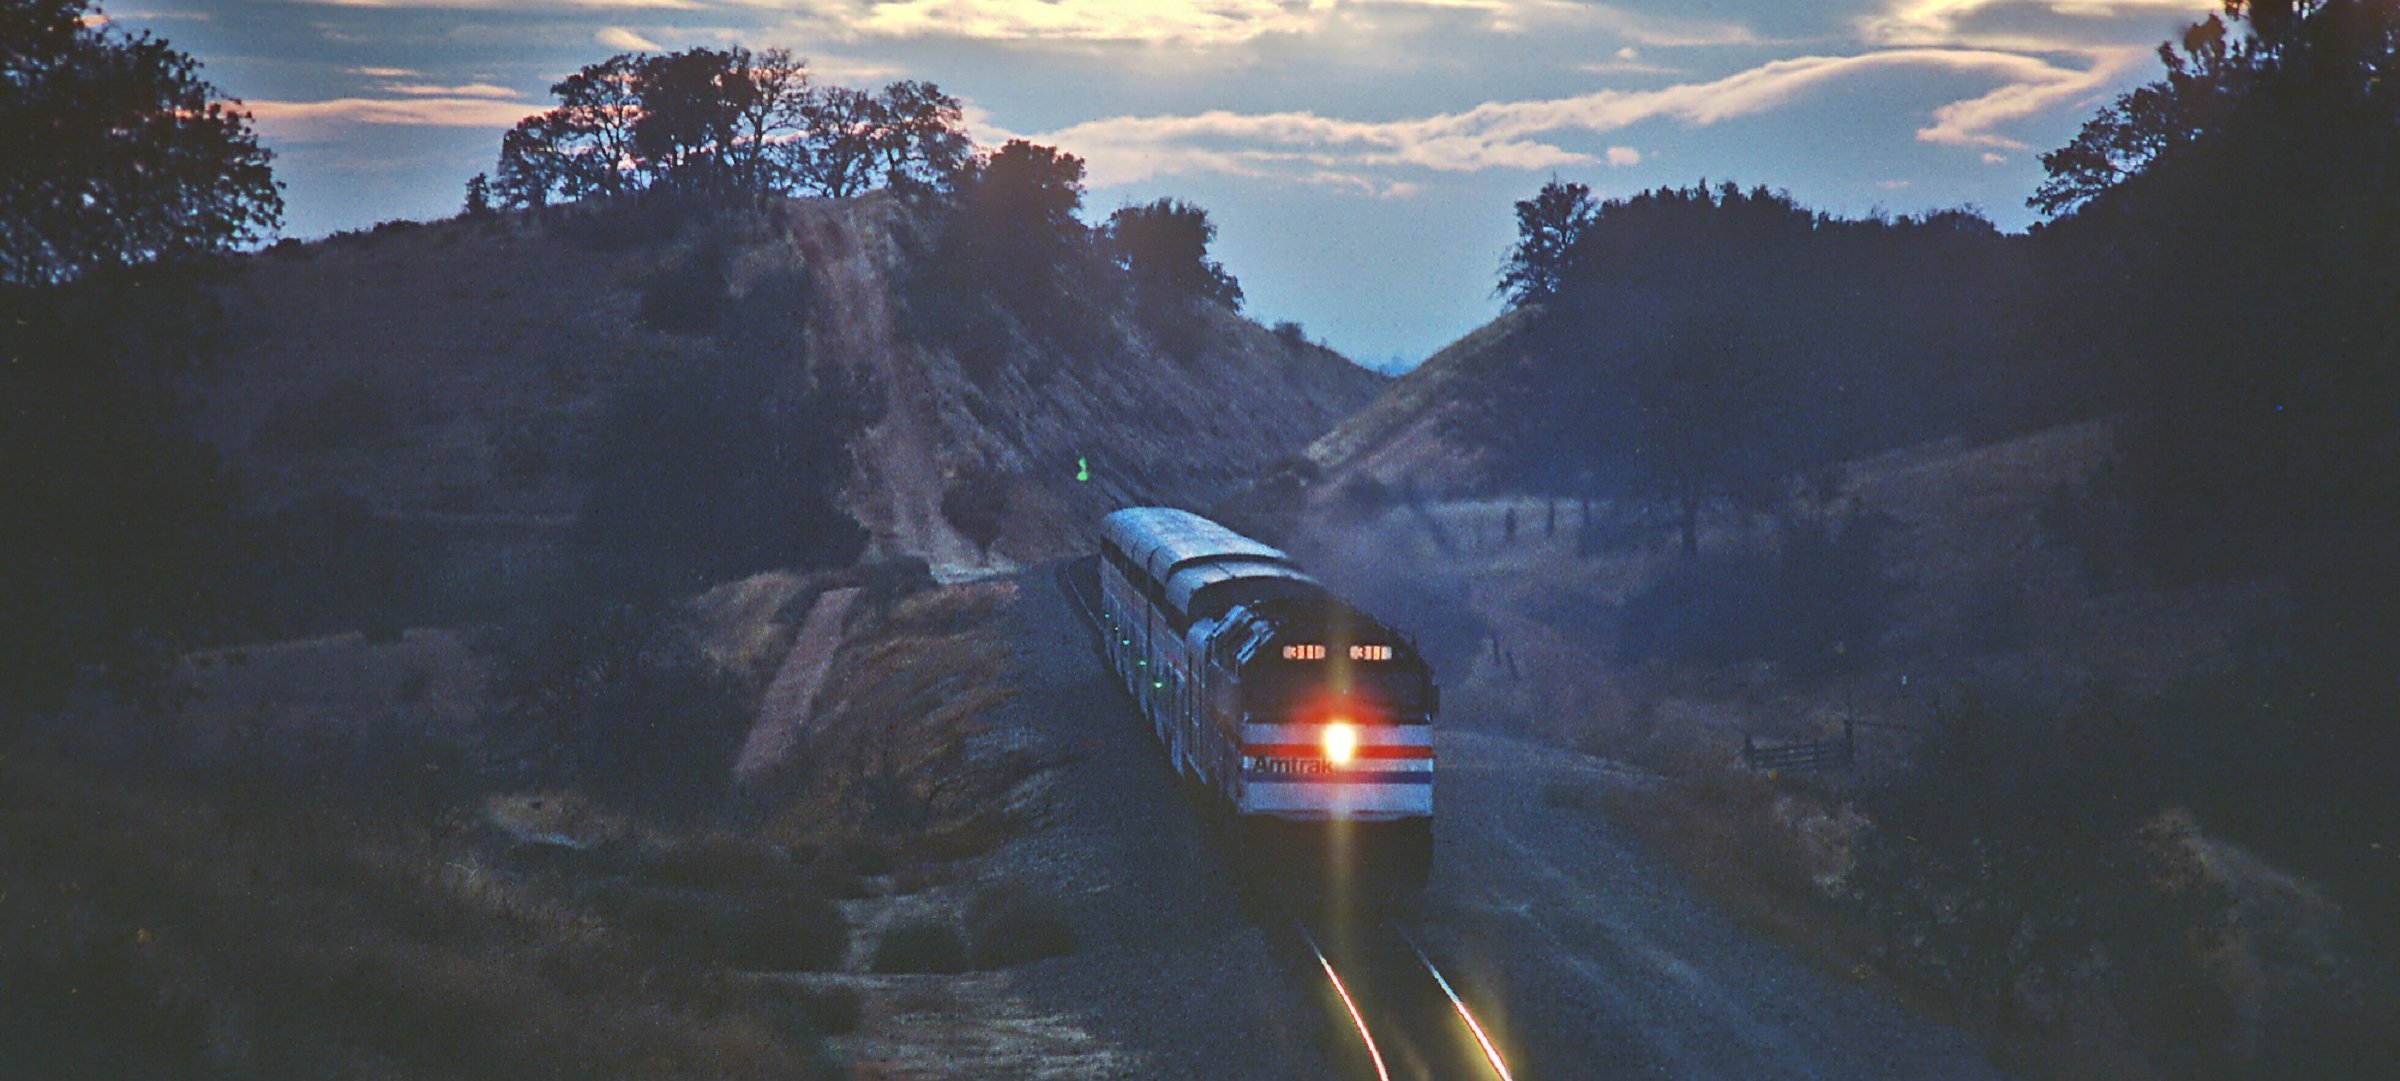 View of an Amtrak train in the mountains